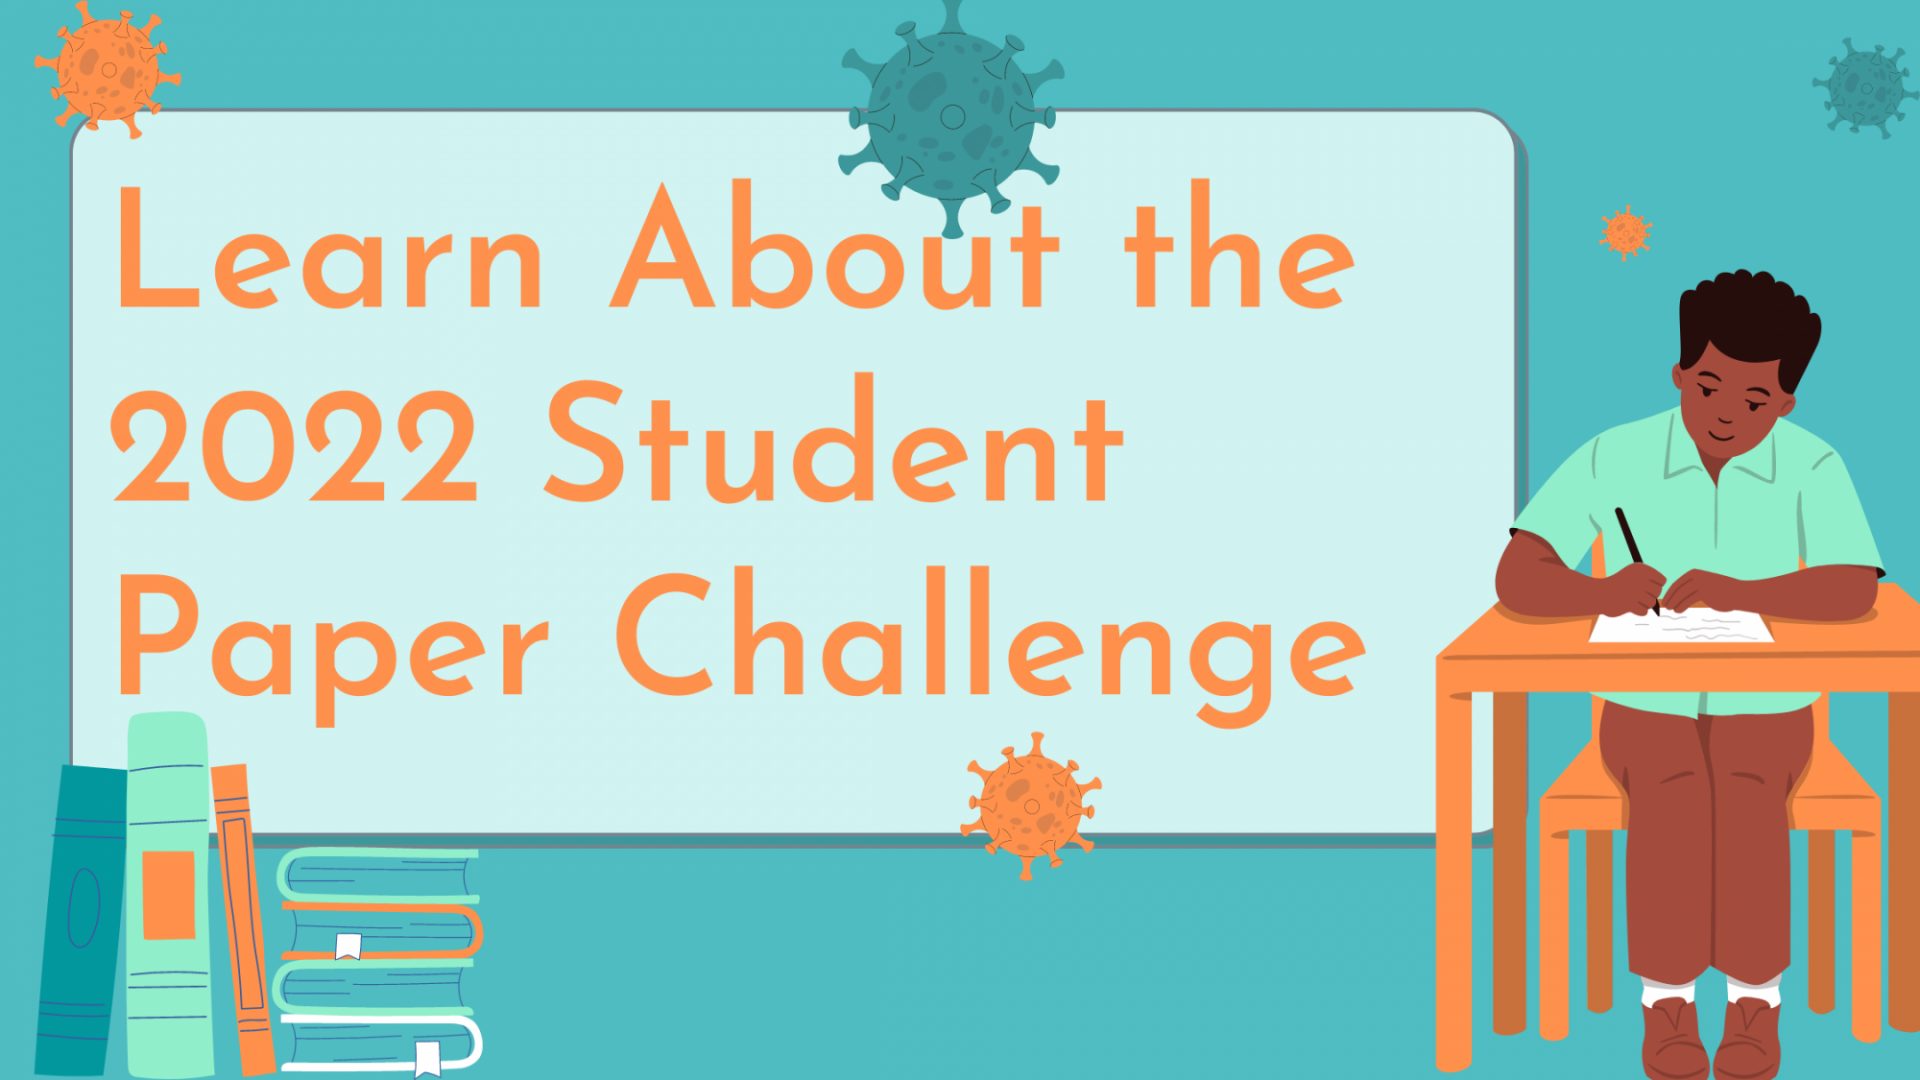 Learn about the 2022 Student Paper Challenge